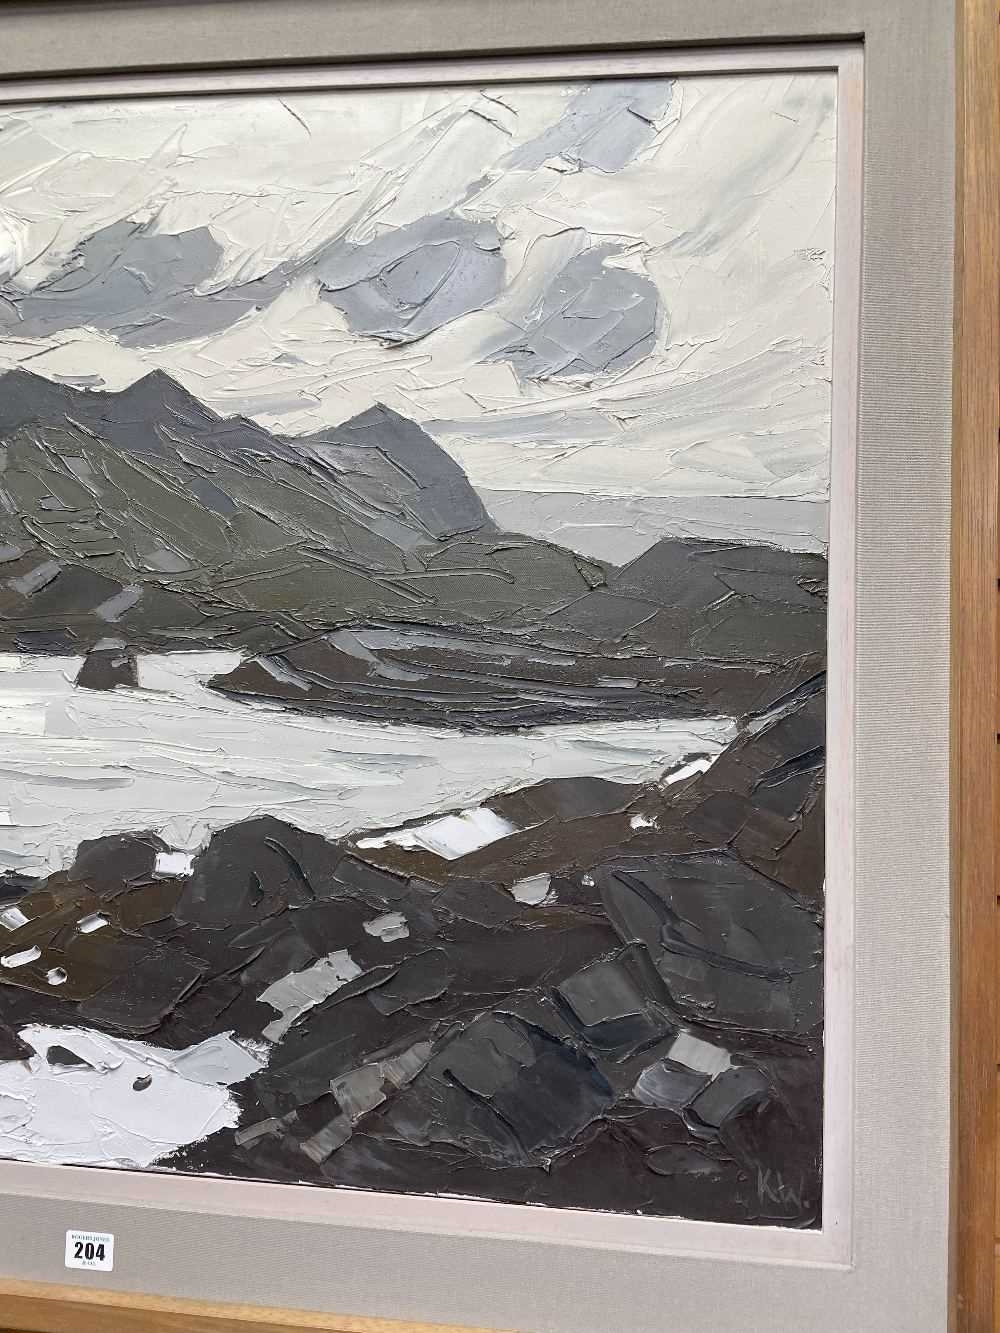 Artwork by Kyffin Williams, ‡ SIR KYFFIN WILLIAMS RA oil on canvas - hazy sun with Eryri (Snowdonia) mountains, Made of oil on canvas